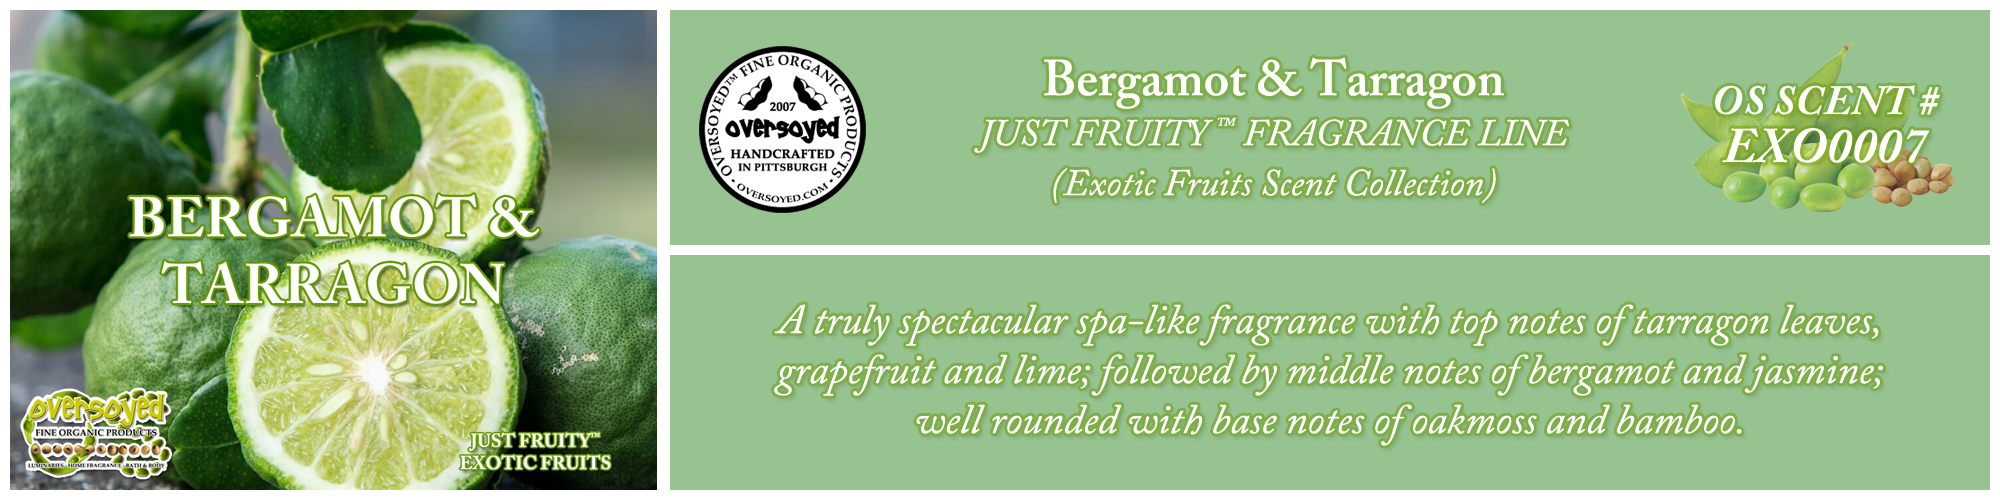 Bergamot & Tarragon Handcrafted Products Collection